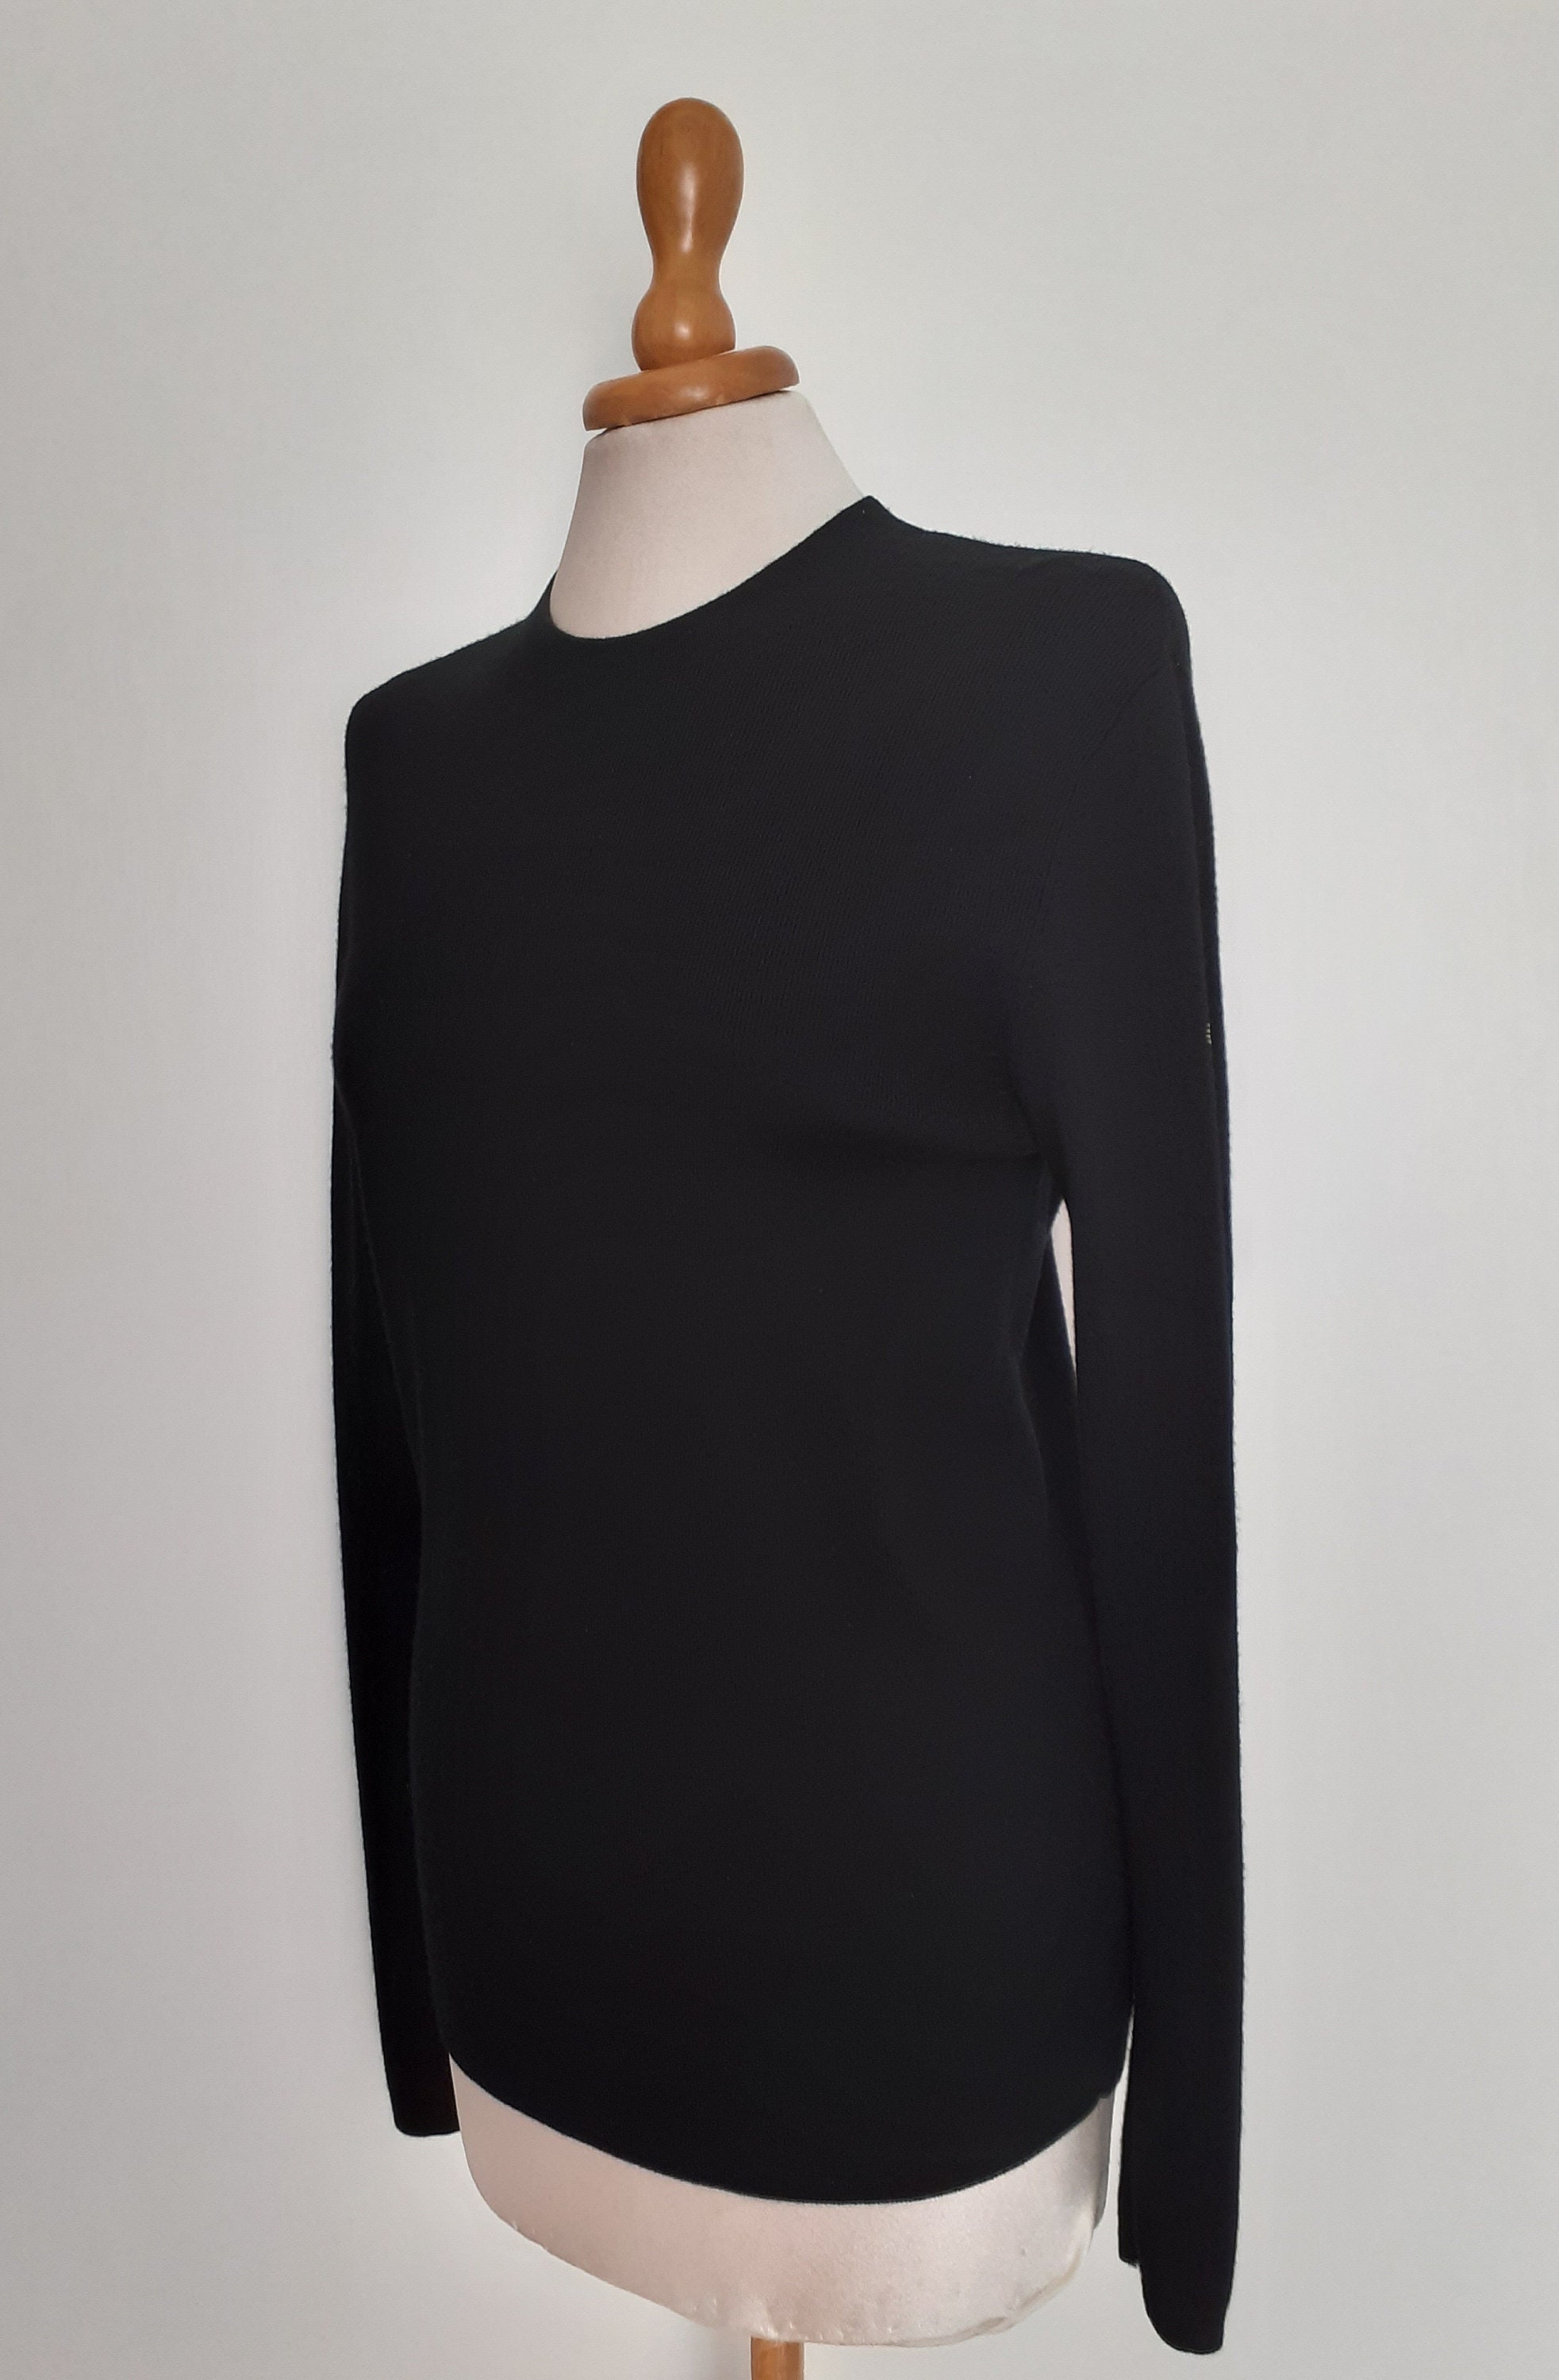 Chanel - Authenticated Top - Cotton Black Plain for Women, Never Worn, with Tag